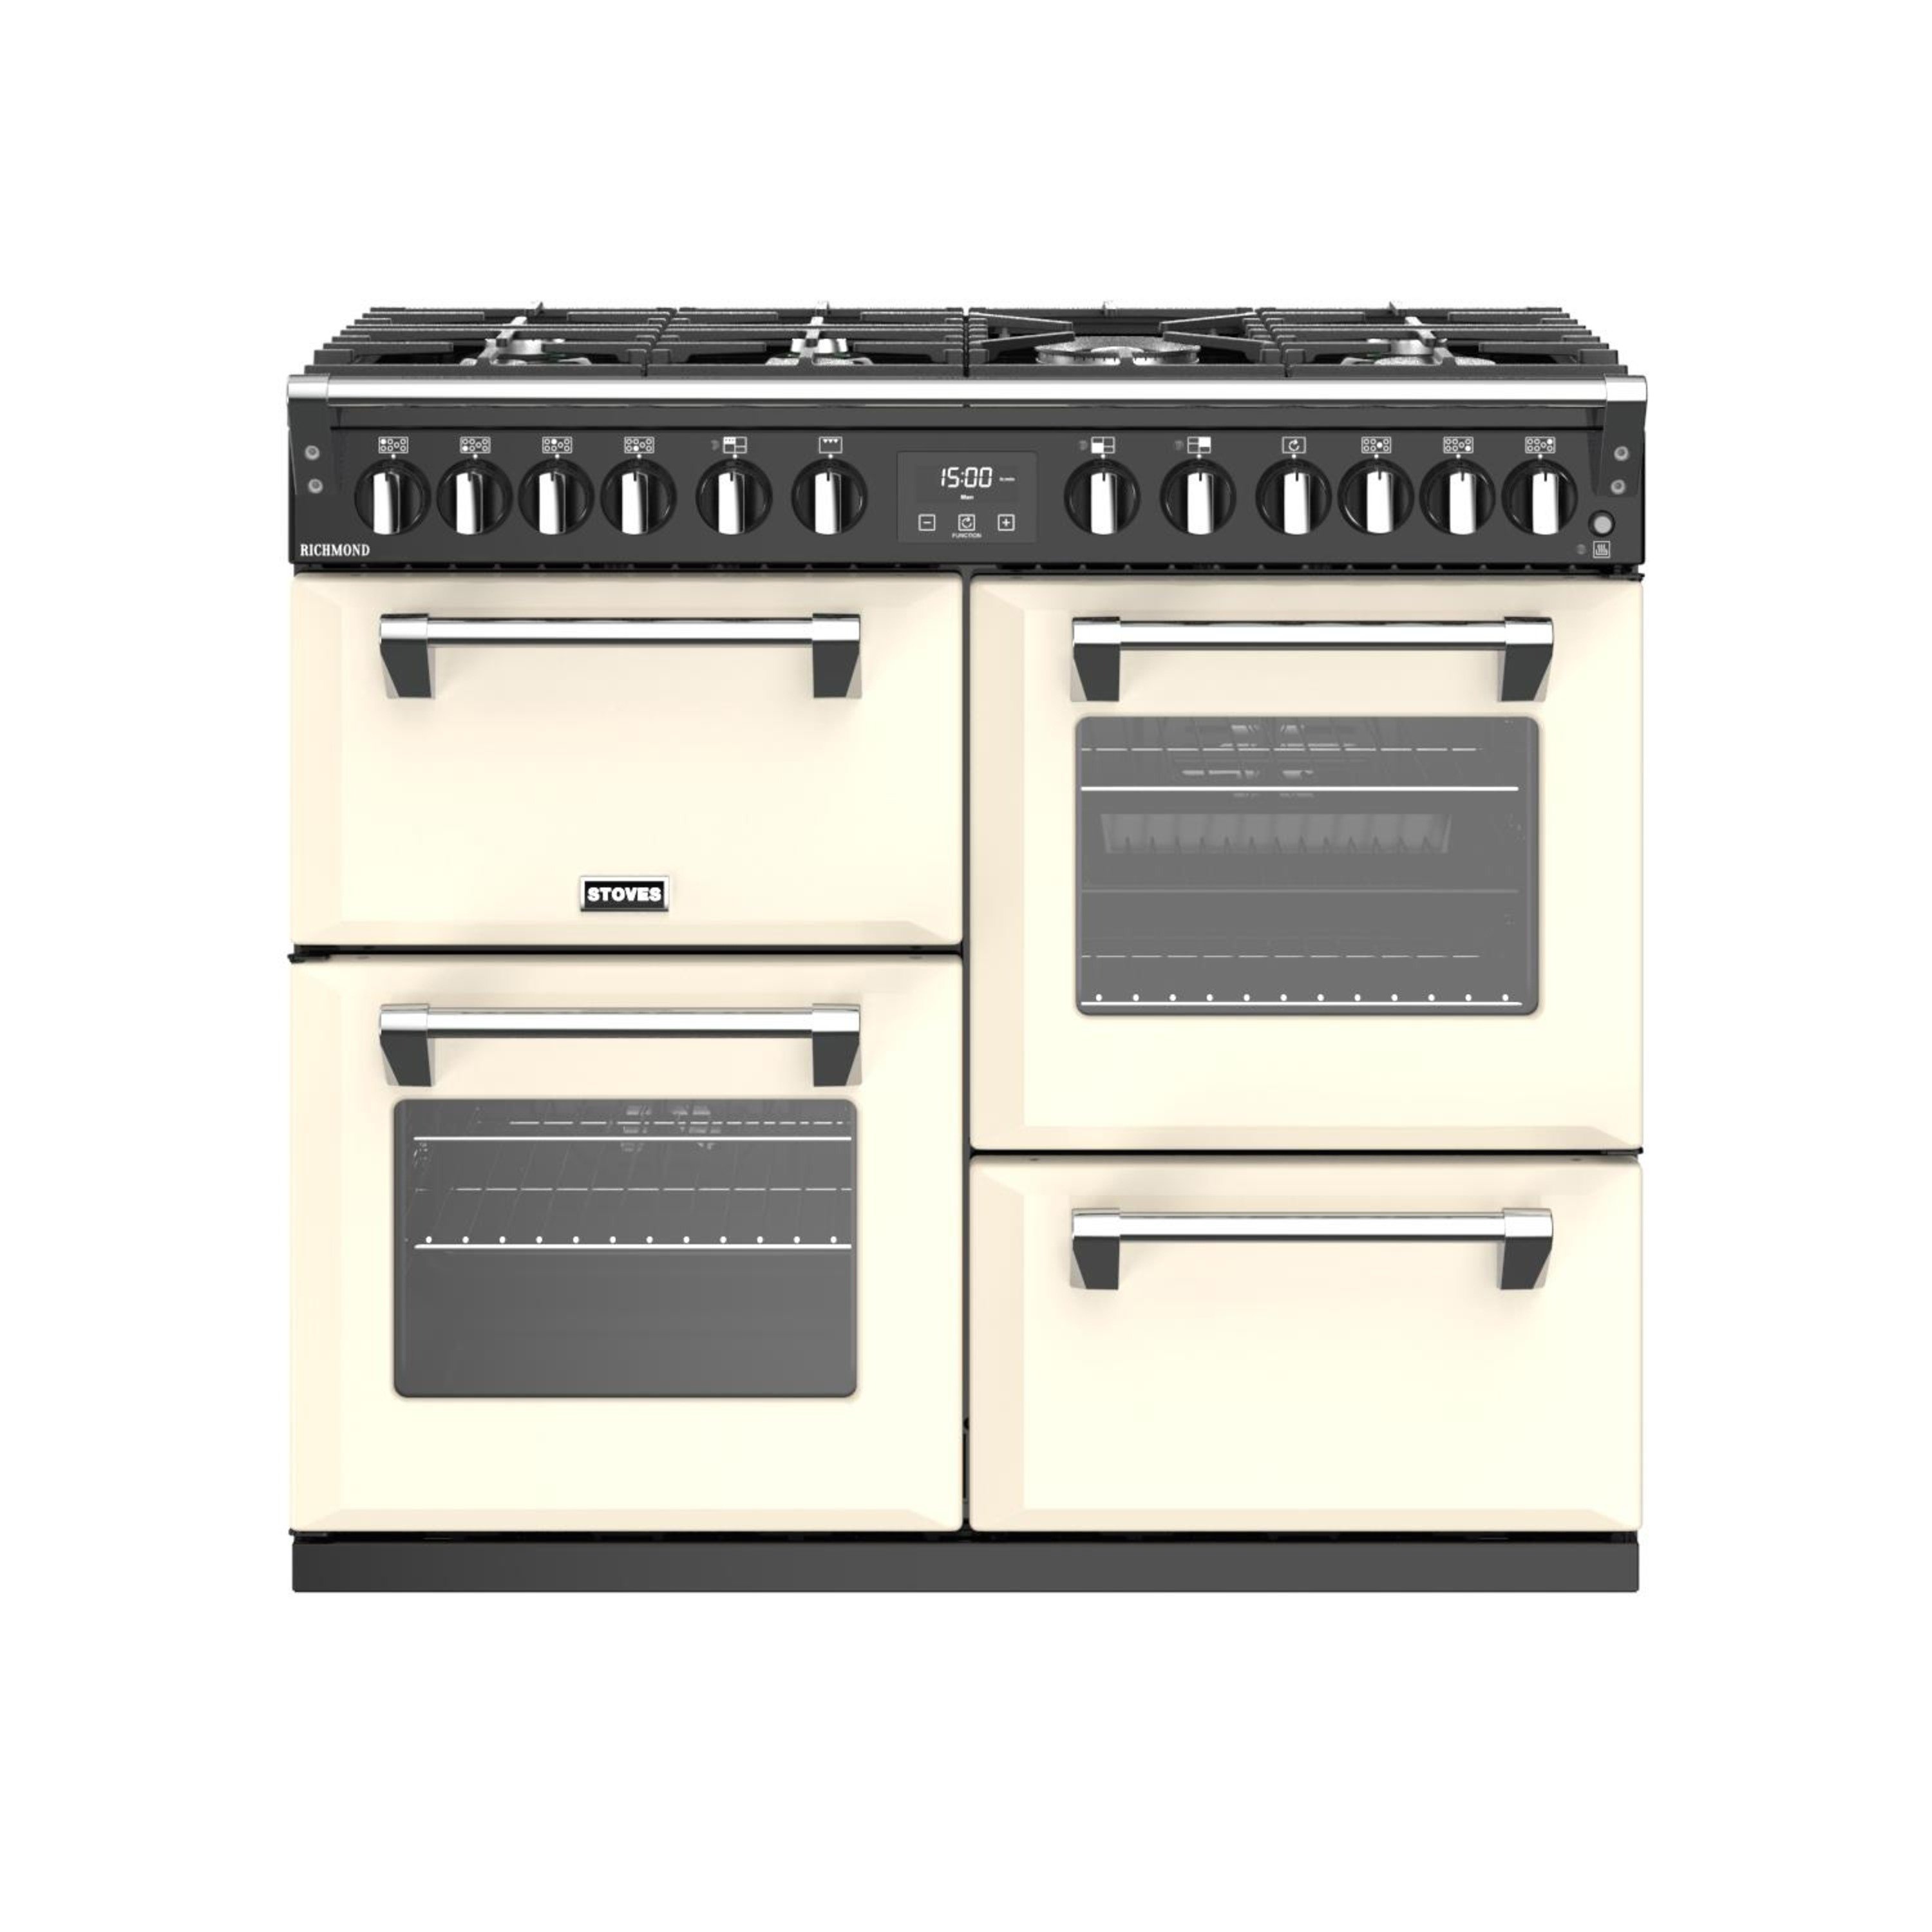 100cm dual fuel range cooker with a 7 burner gas hob, conventional oven & grill, multifunction main oven, fanned second oven, and dedicated slow cook oven